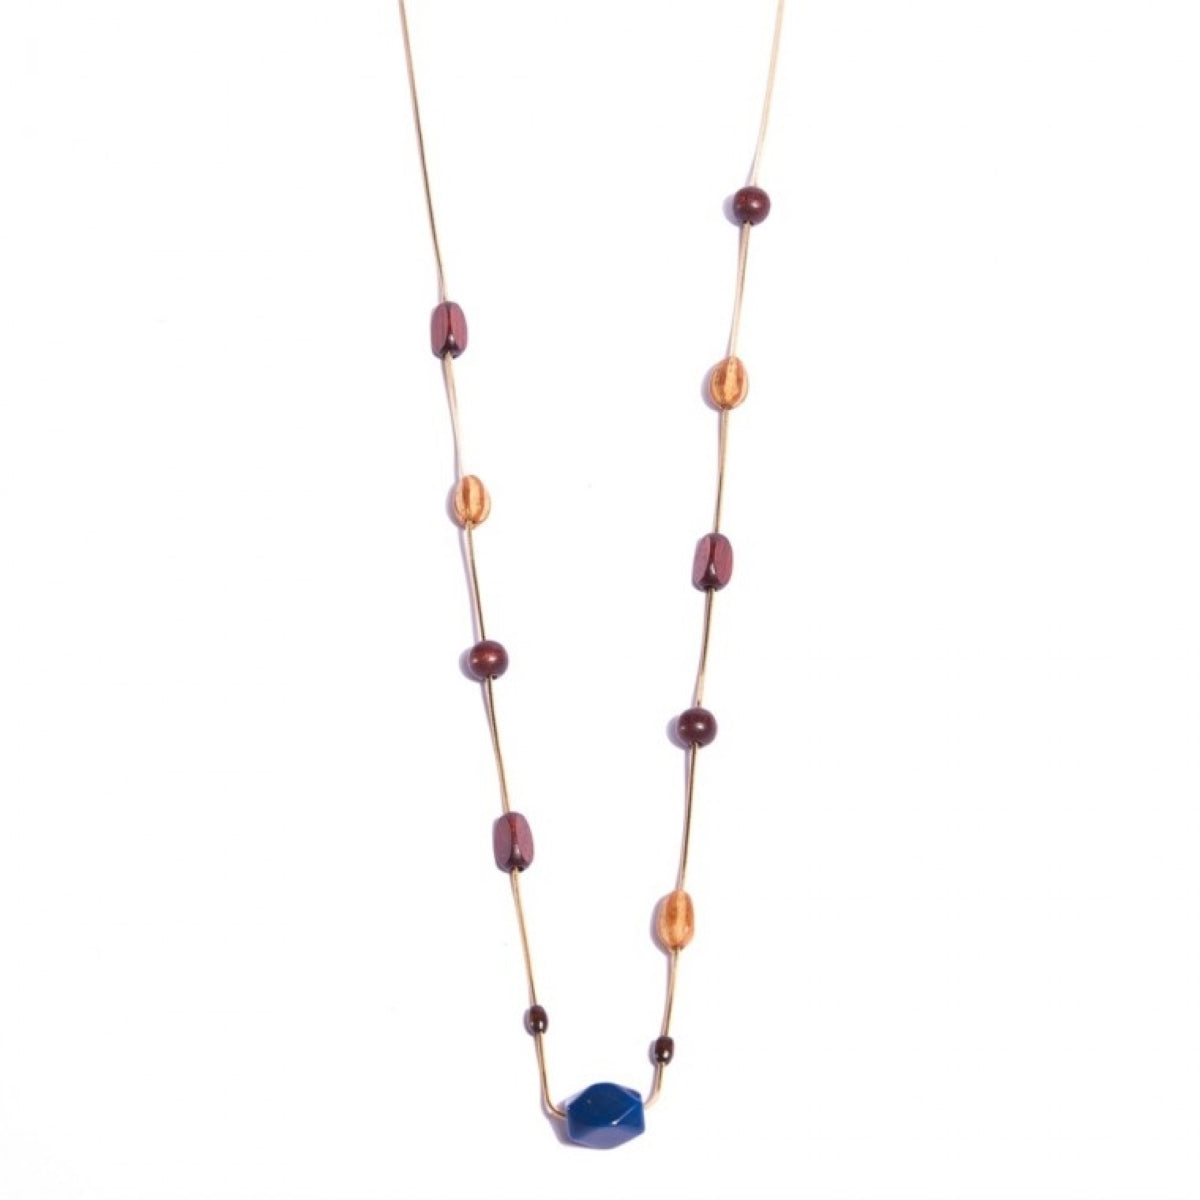 Long thin with Seeds Necklace (acai, Santa Barbara), Wood Beads, Natural Agate Stone and Gold-Plated Metals